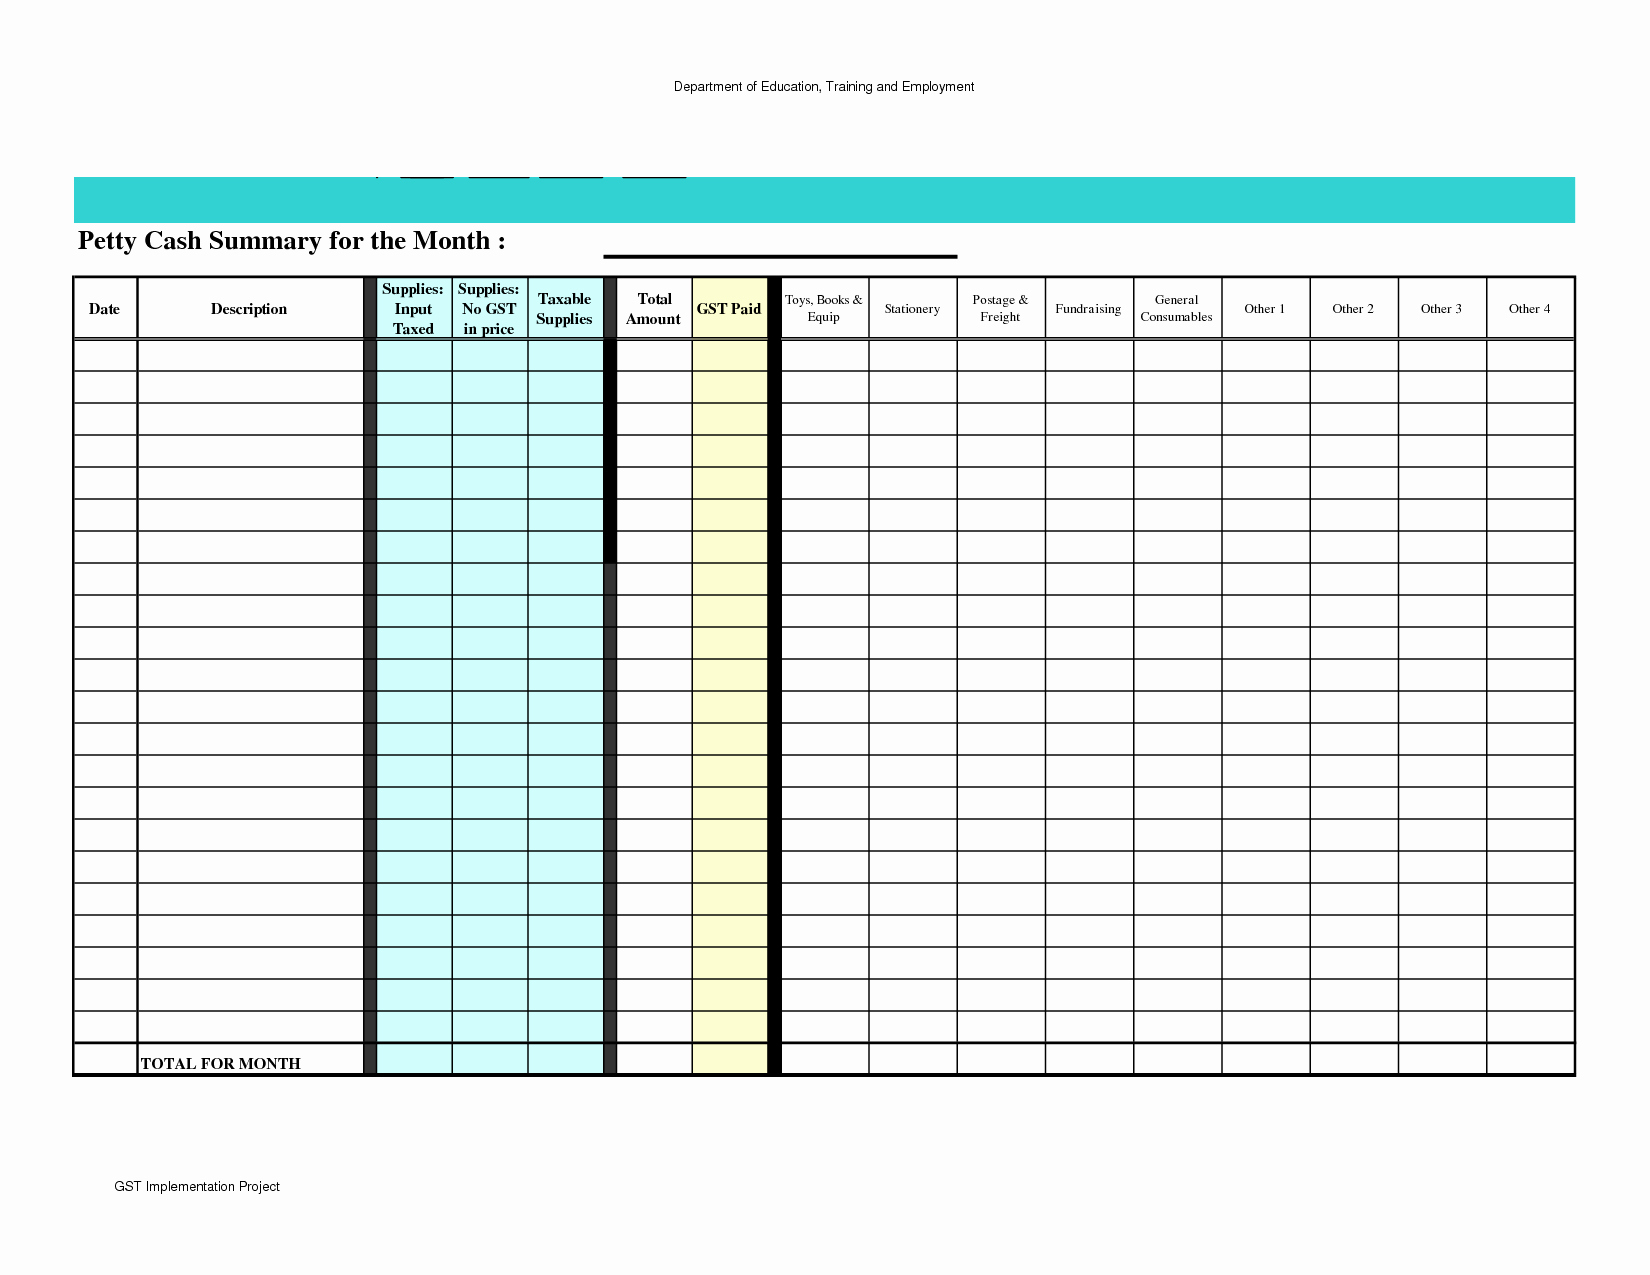 Accounts Payable Tracking Spreadsheet Best Of Petty Cash Spreadsheet and Accounts Payable Spreadsheet Template